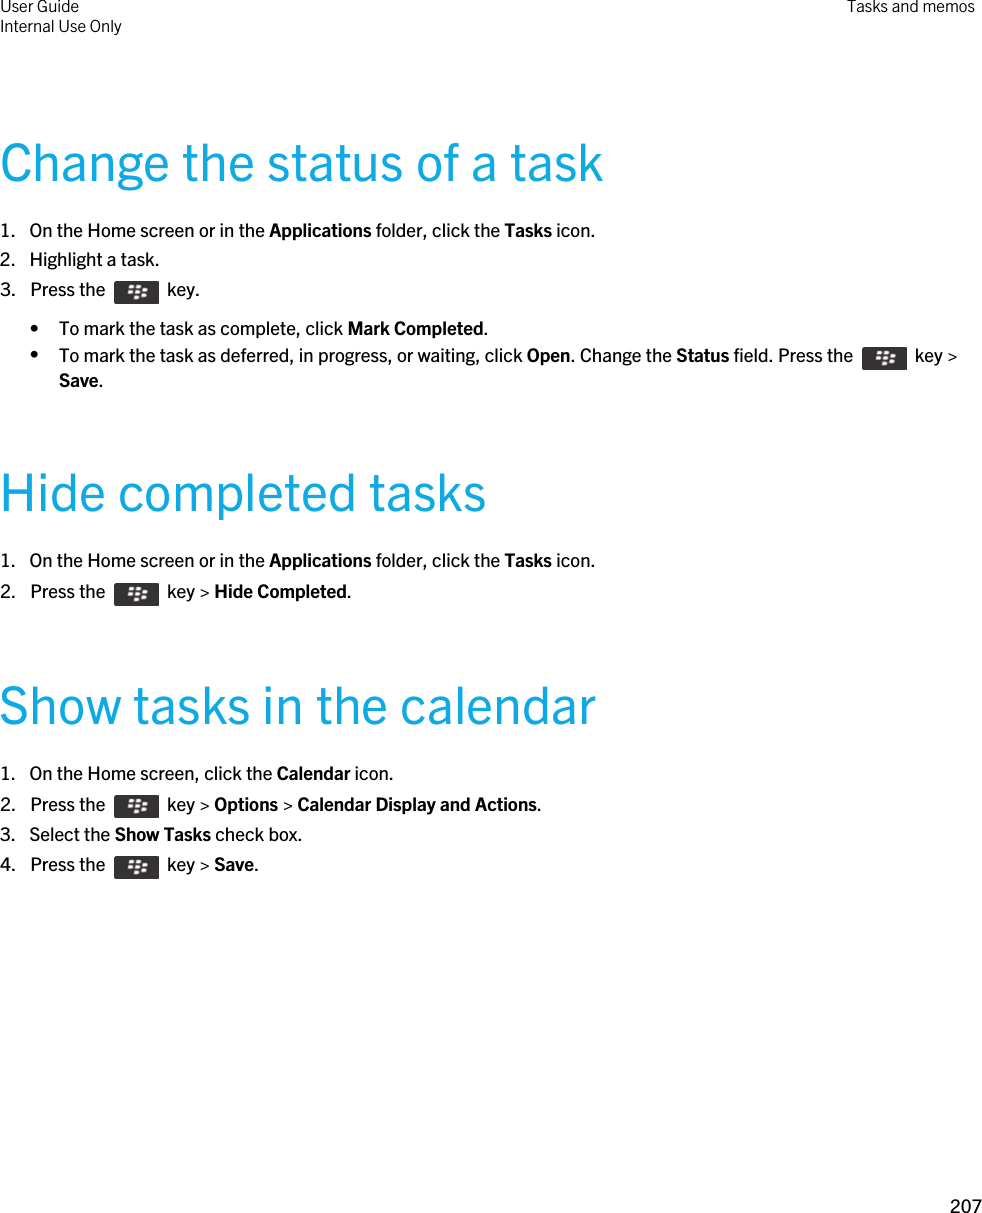 Change the status of a task1. On the Home screen or in the Applications folder, click the Tasks icon.2. Highlight a task.3.  Press the    key. • To mark the task as complete, click Mark Completed.•To mark the task as deferred, in progress, or waiting, click Open. Change the Status field. Press the    key &gt; Save.Hide completed tasks1. On the Home screen or in the Applications folder, click the Tasks icon.2.  Press the    key &gt; Hide Completed.Show tasks in the calendar1. On the Home screen, click the Calendar icon.2.  Press the    key &gt; Options &gt; Calendar Display and Actions. 3. Select the Show Tasks check box.4.  Press the    key &gt; Save. User GuideInternal Use Only Tasks and memos207 